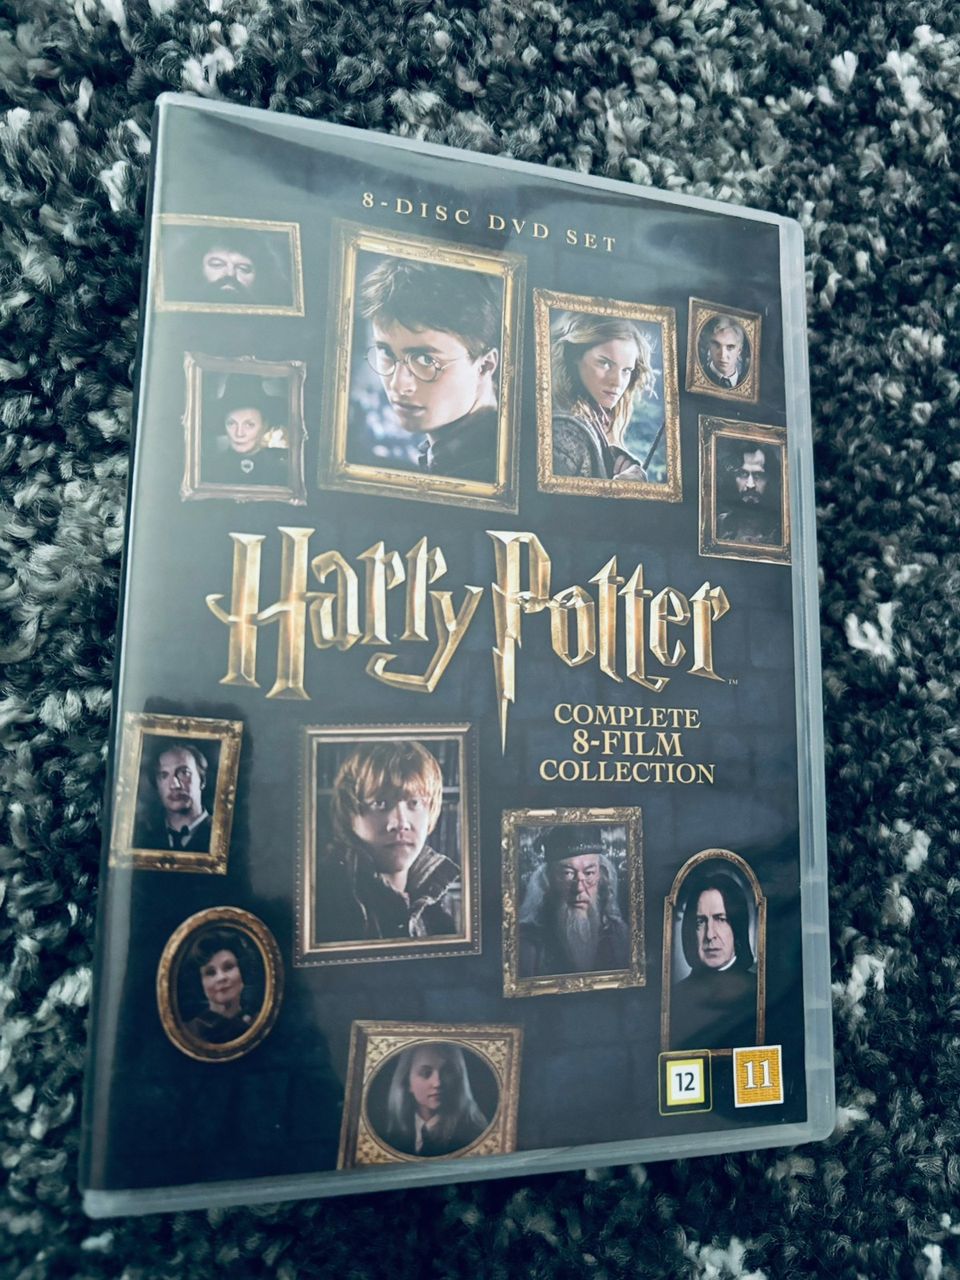 Harry Potter 8-film collection DVD